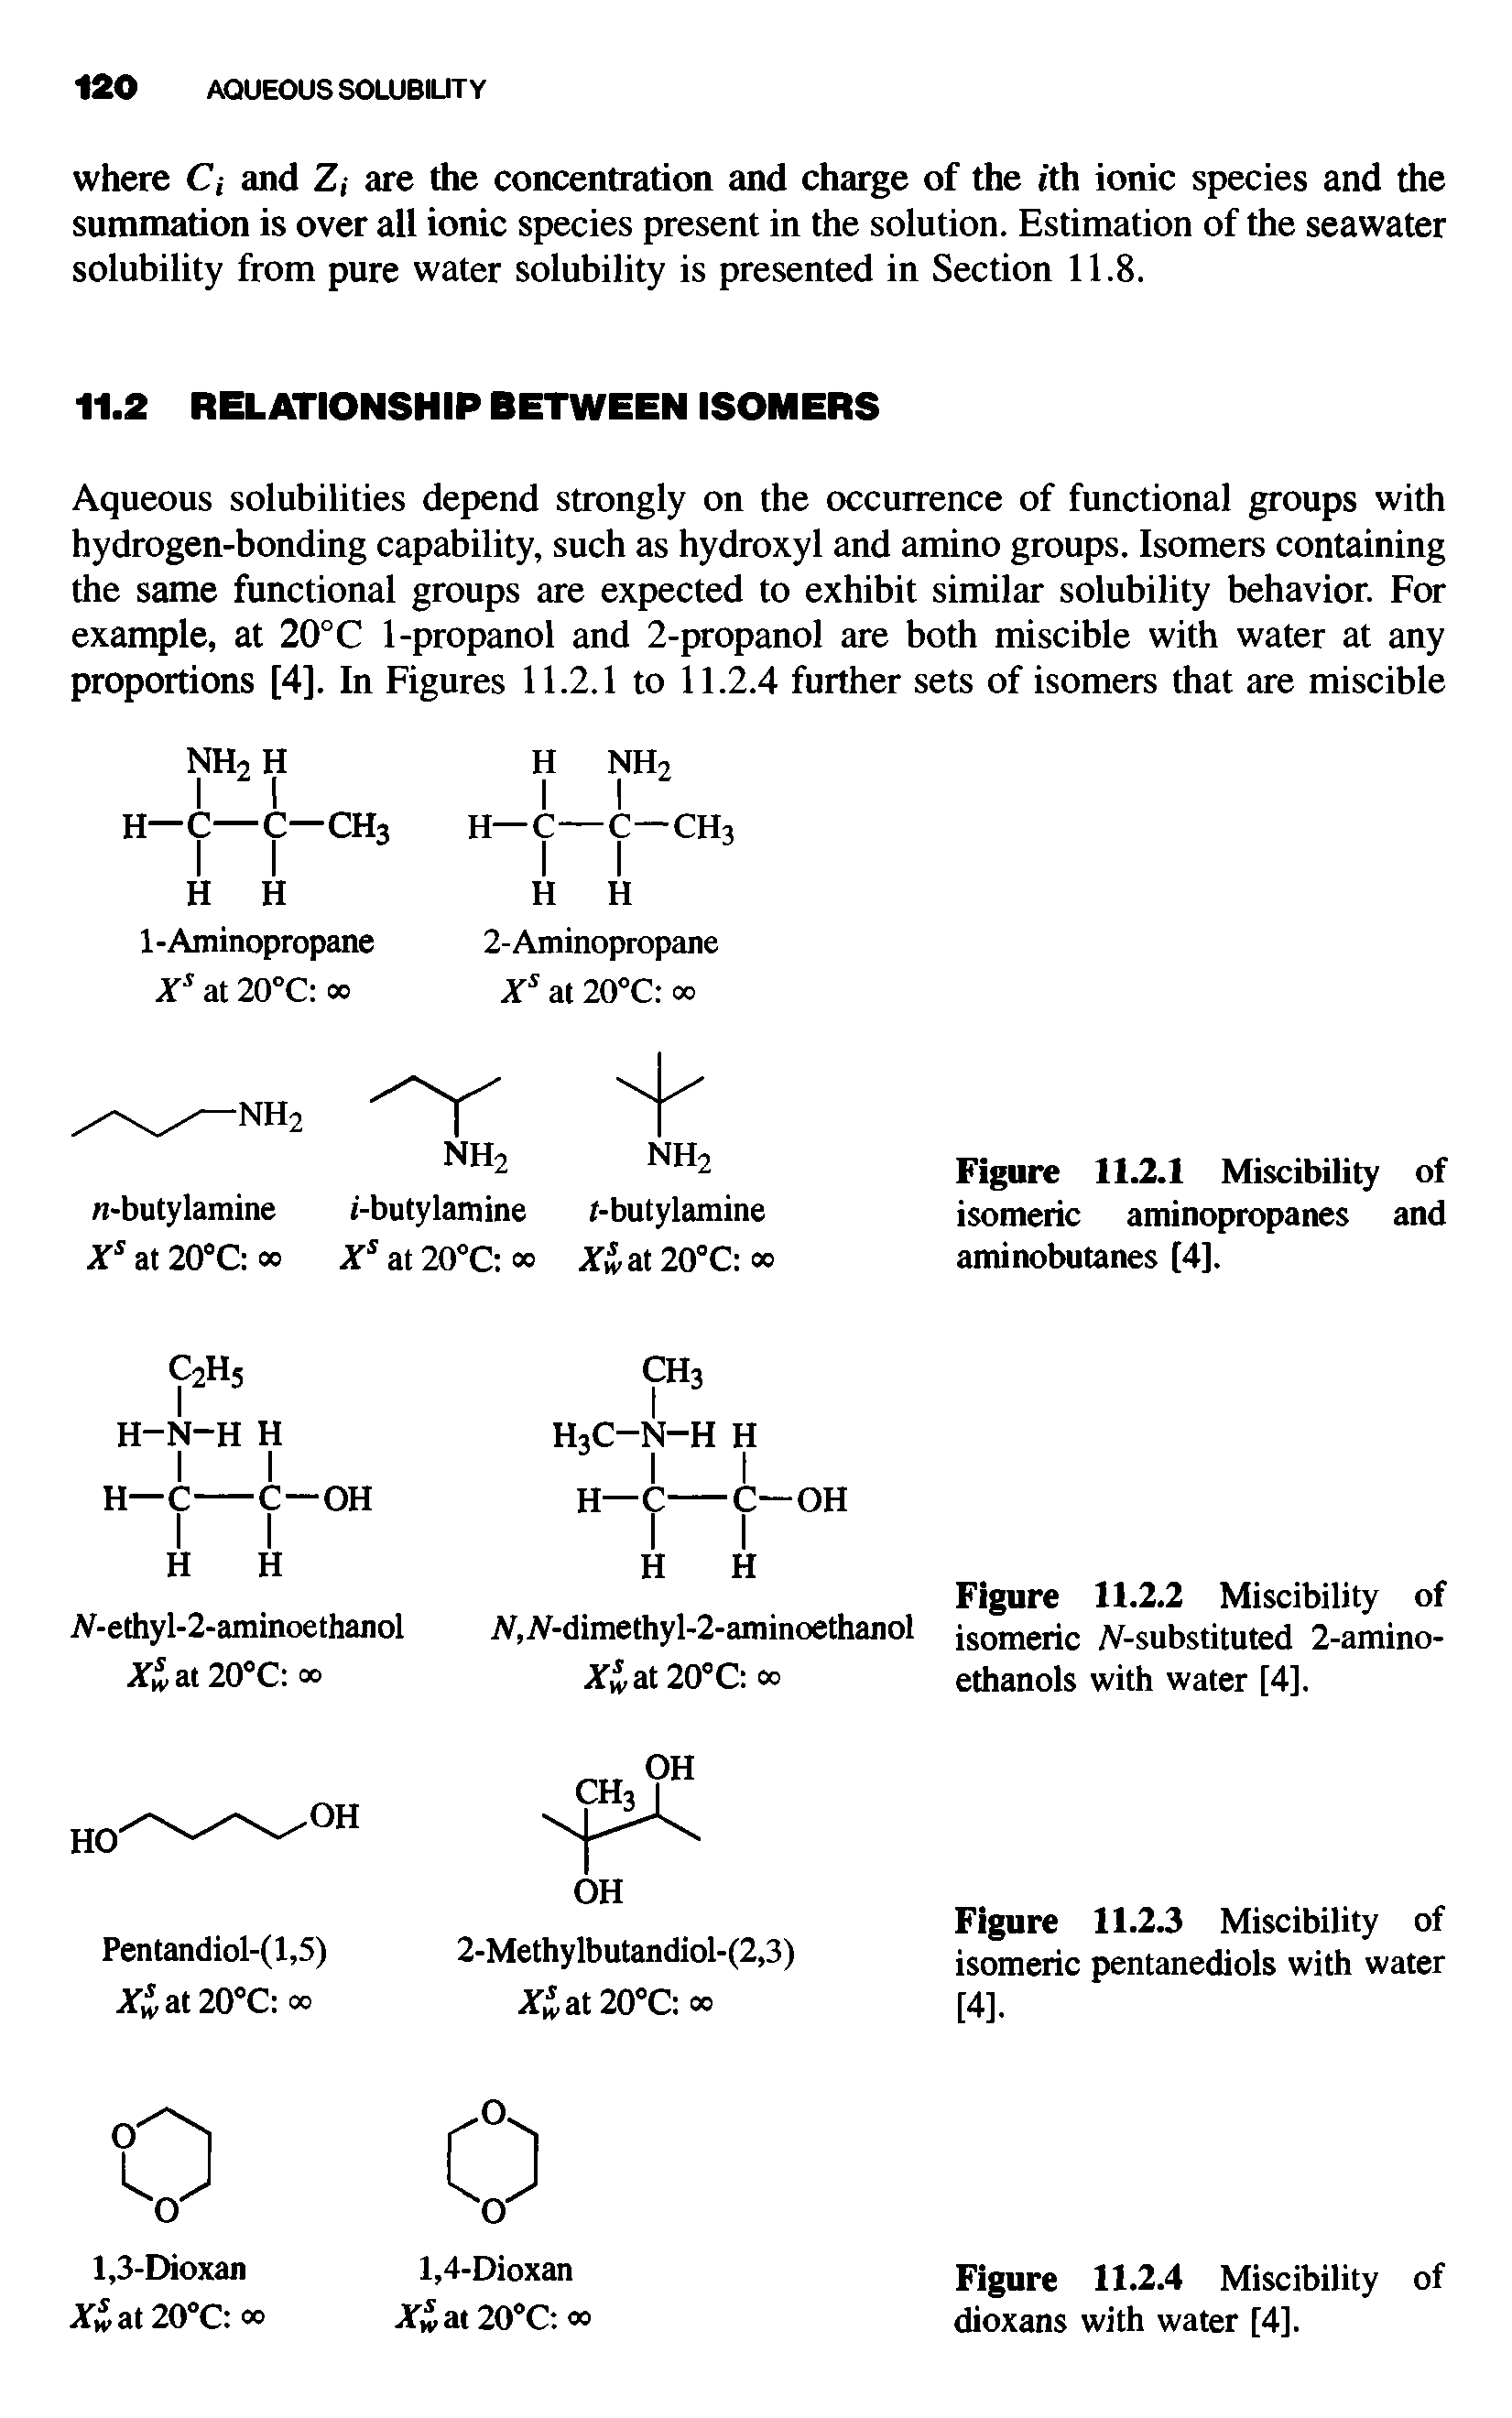 Figure 11.2.2 Miscibility of isomeric -substituted 2-amino-ethanols with water [4].